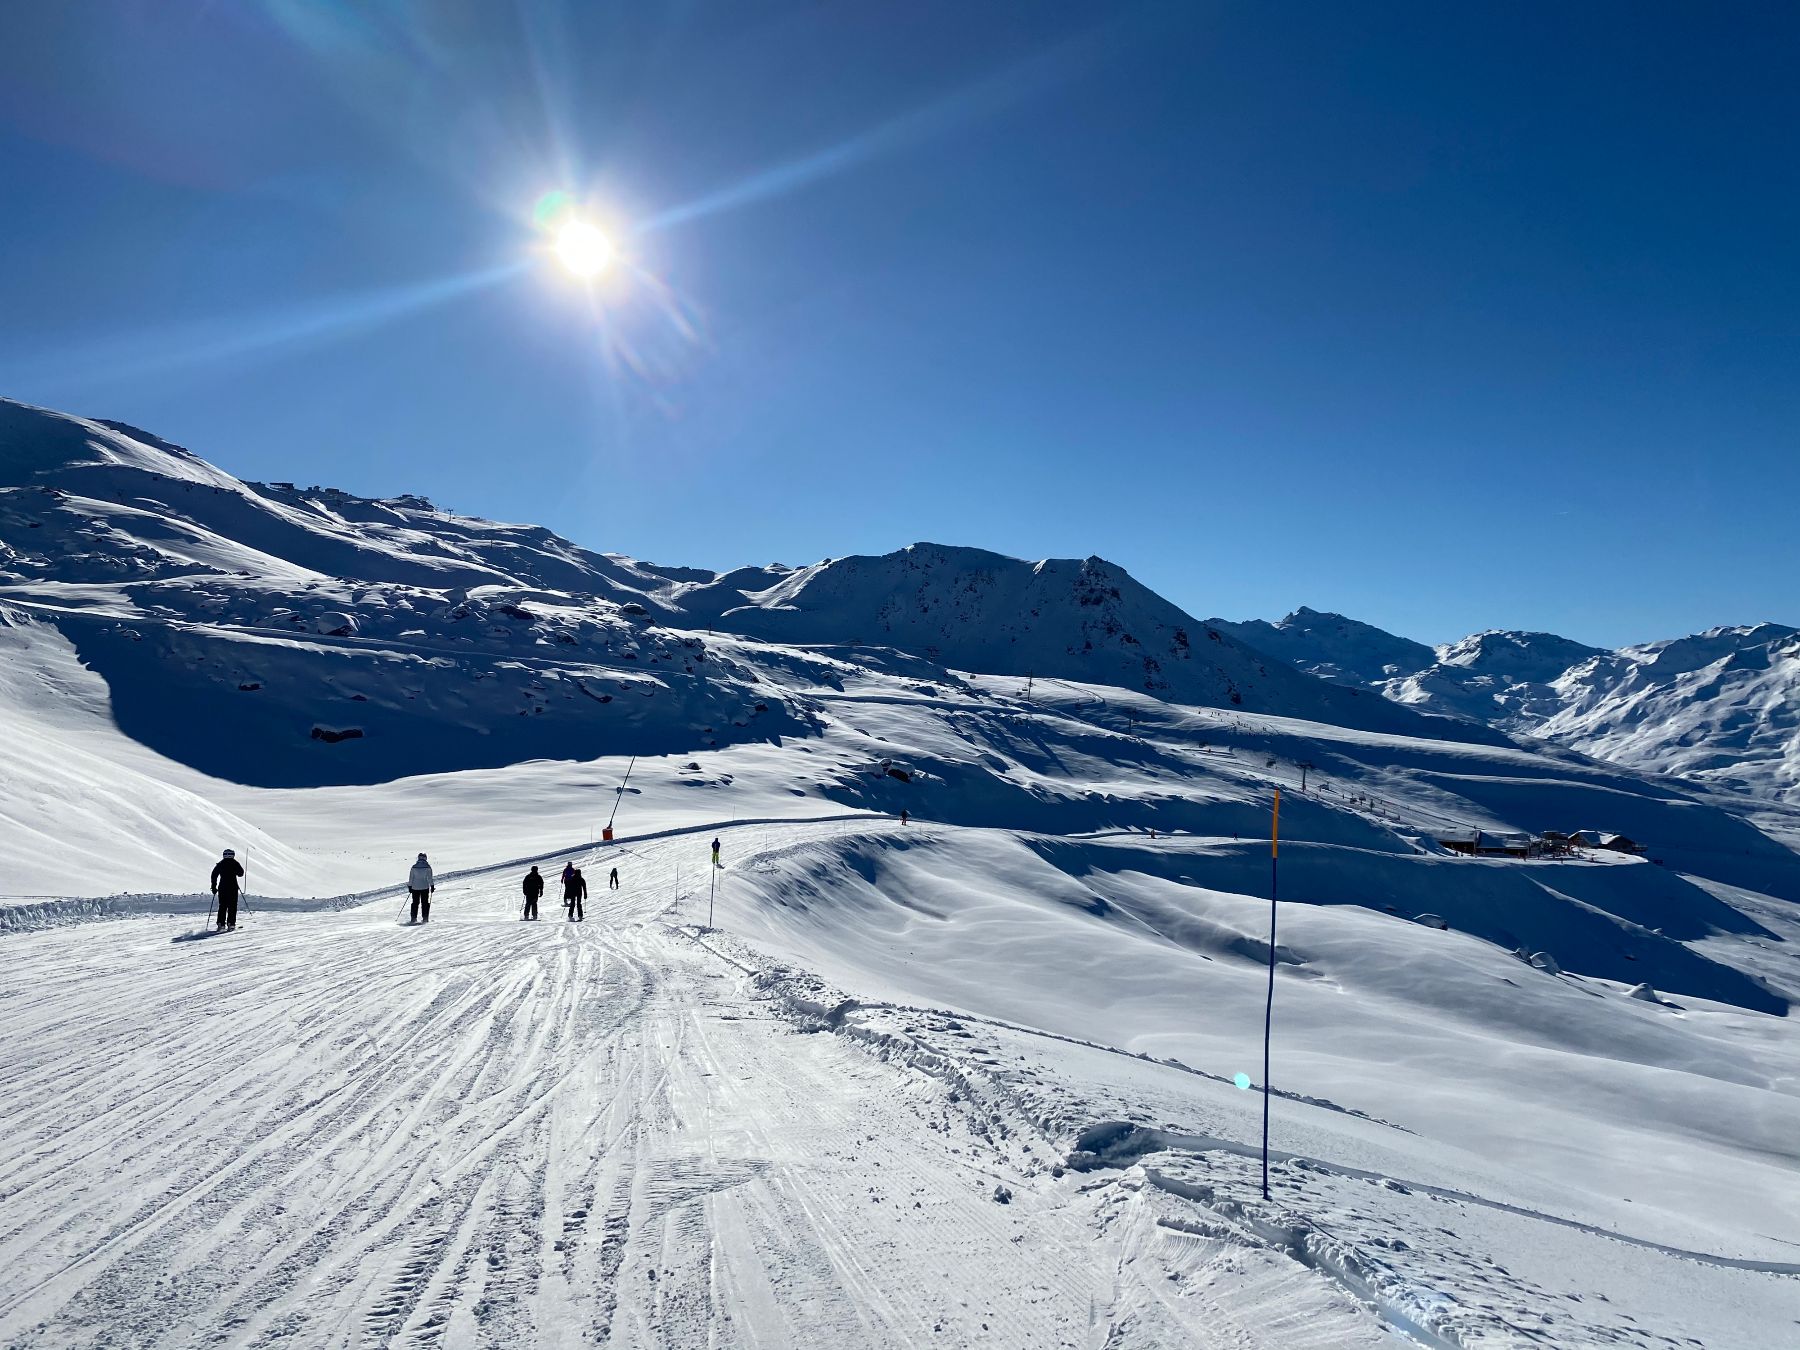 A Christmas Ski Vacation in Les 3 Vallées - the Largest Ski Area in the World